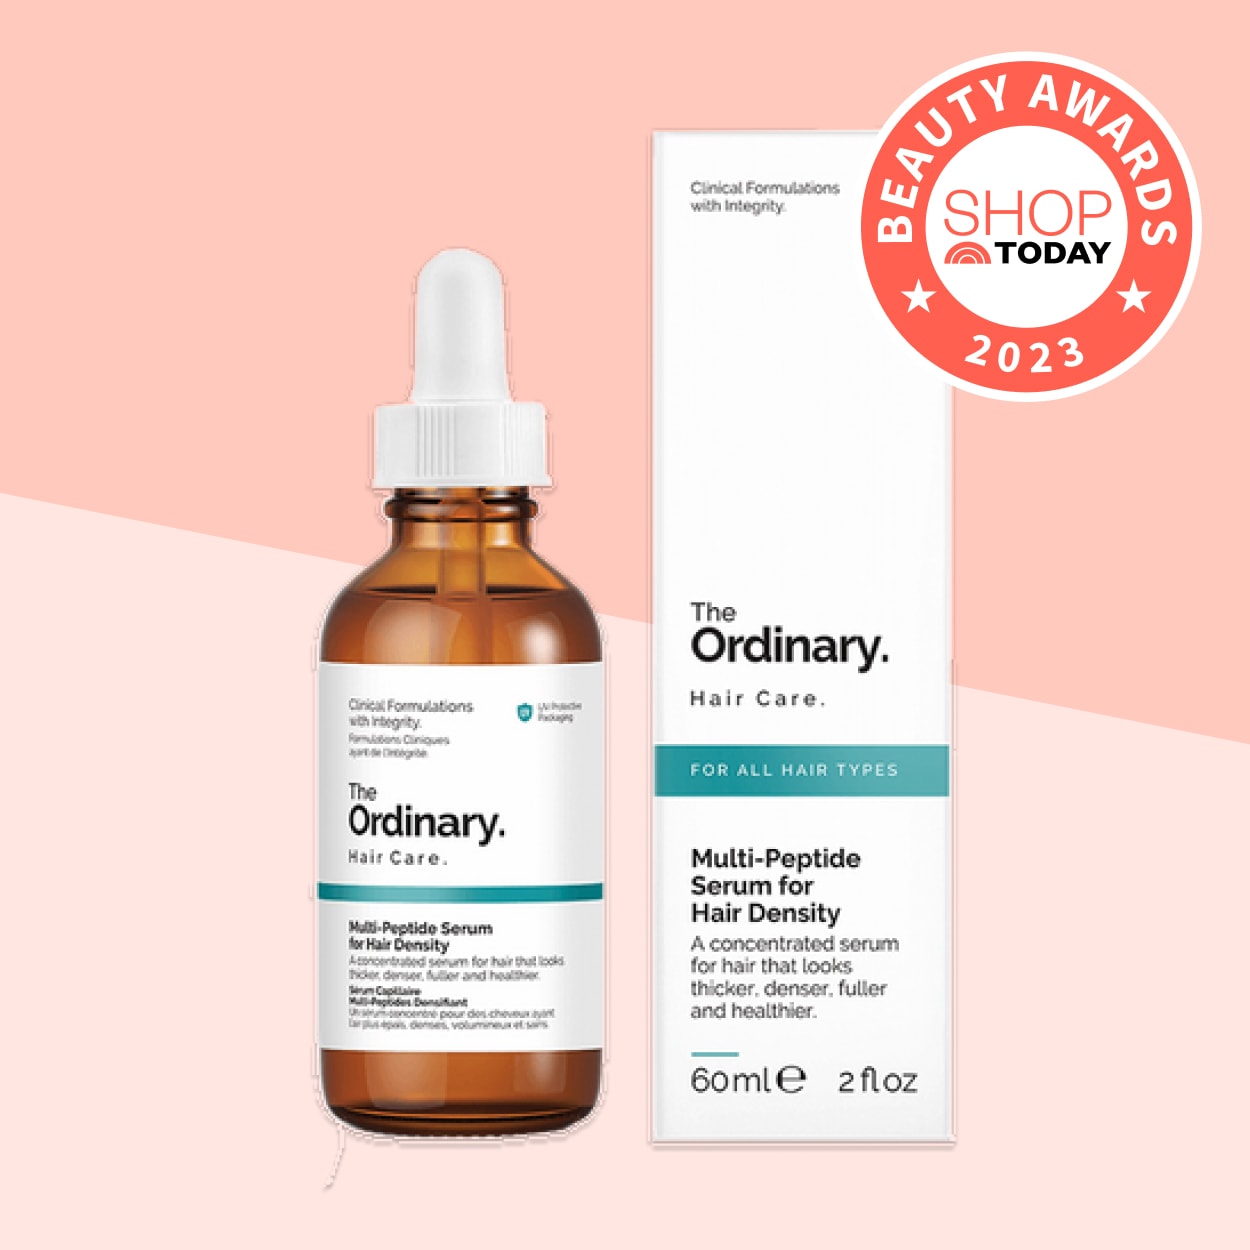 The Ordinary Best Sellers Top 10 - Top 10 Best Selling Products